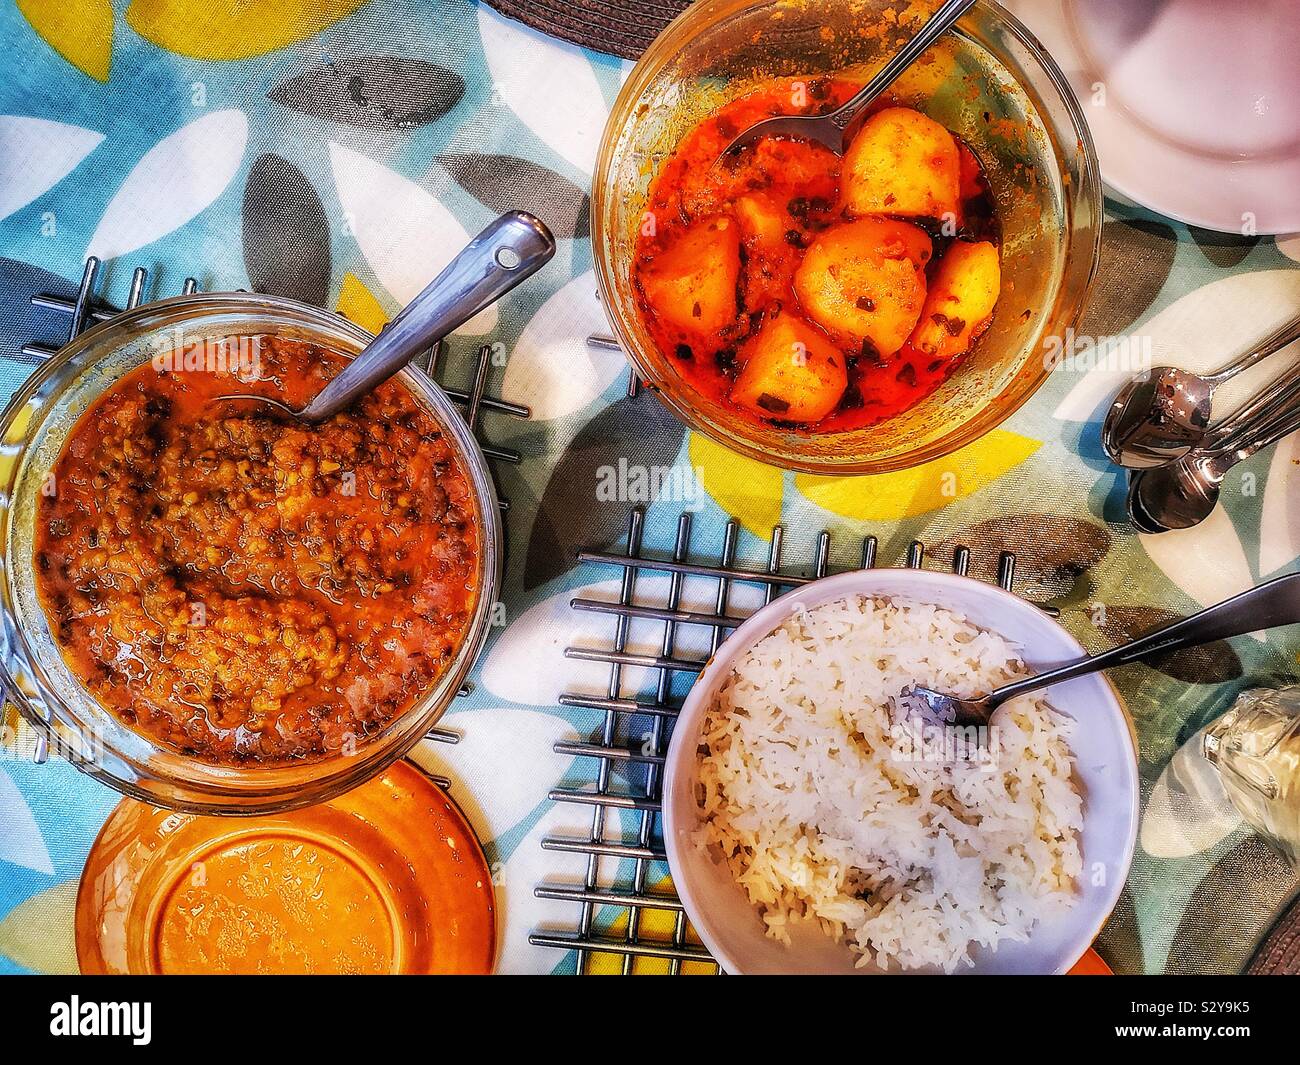 Elevated view of homemade Indian meal with mung dal, potato curry and rice Stock Photo